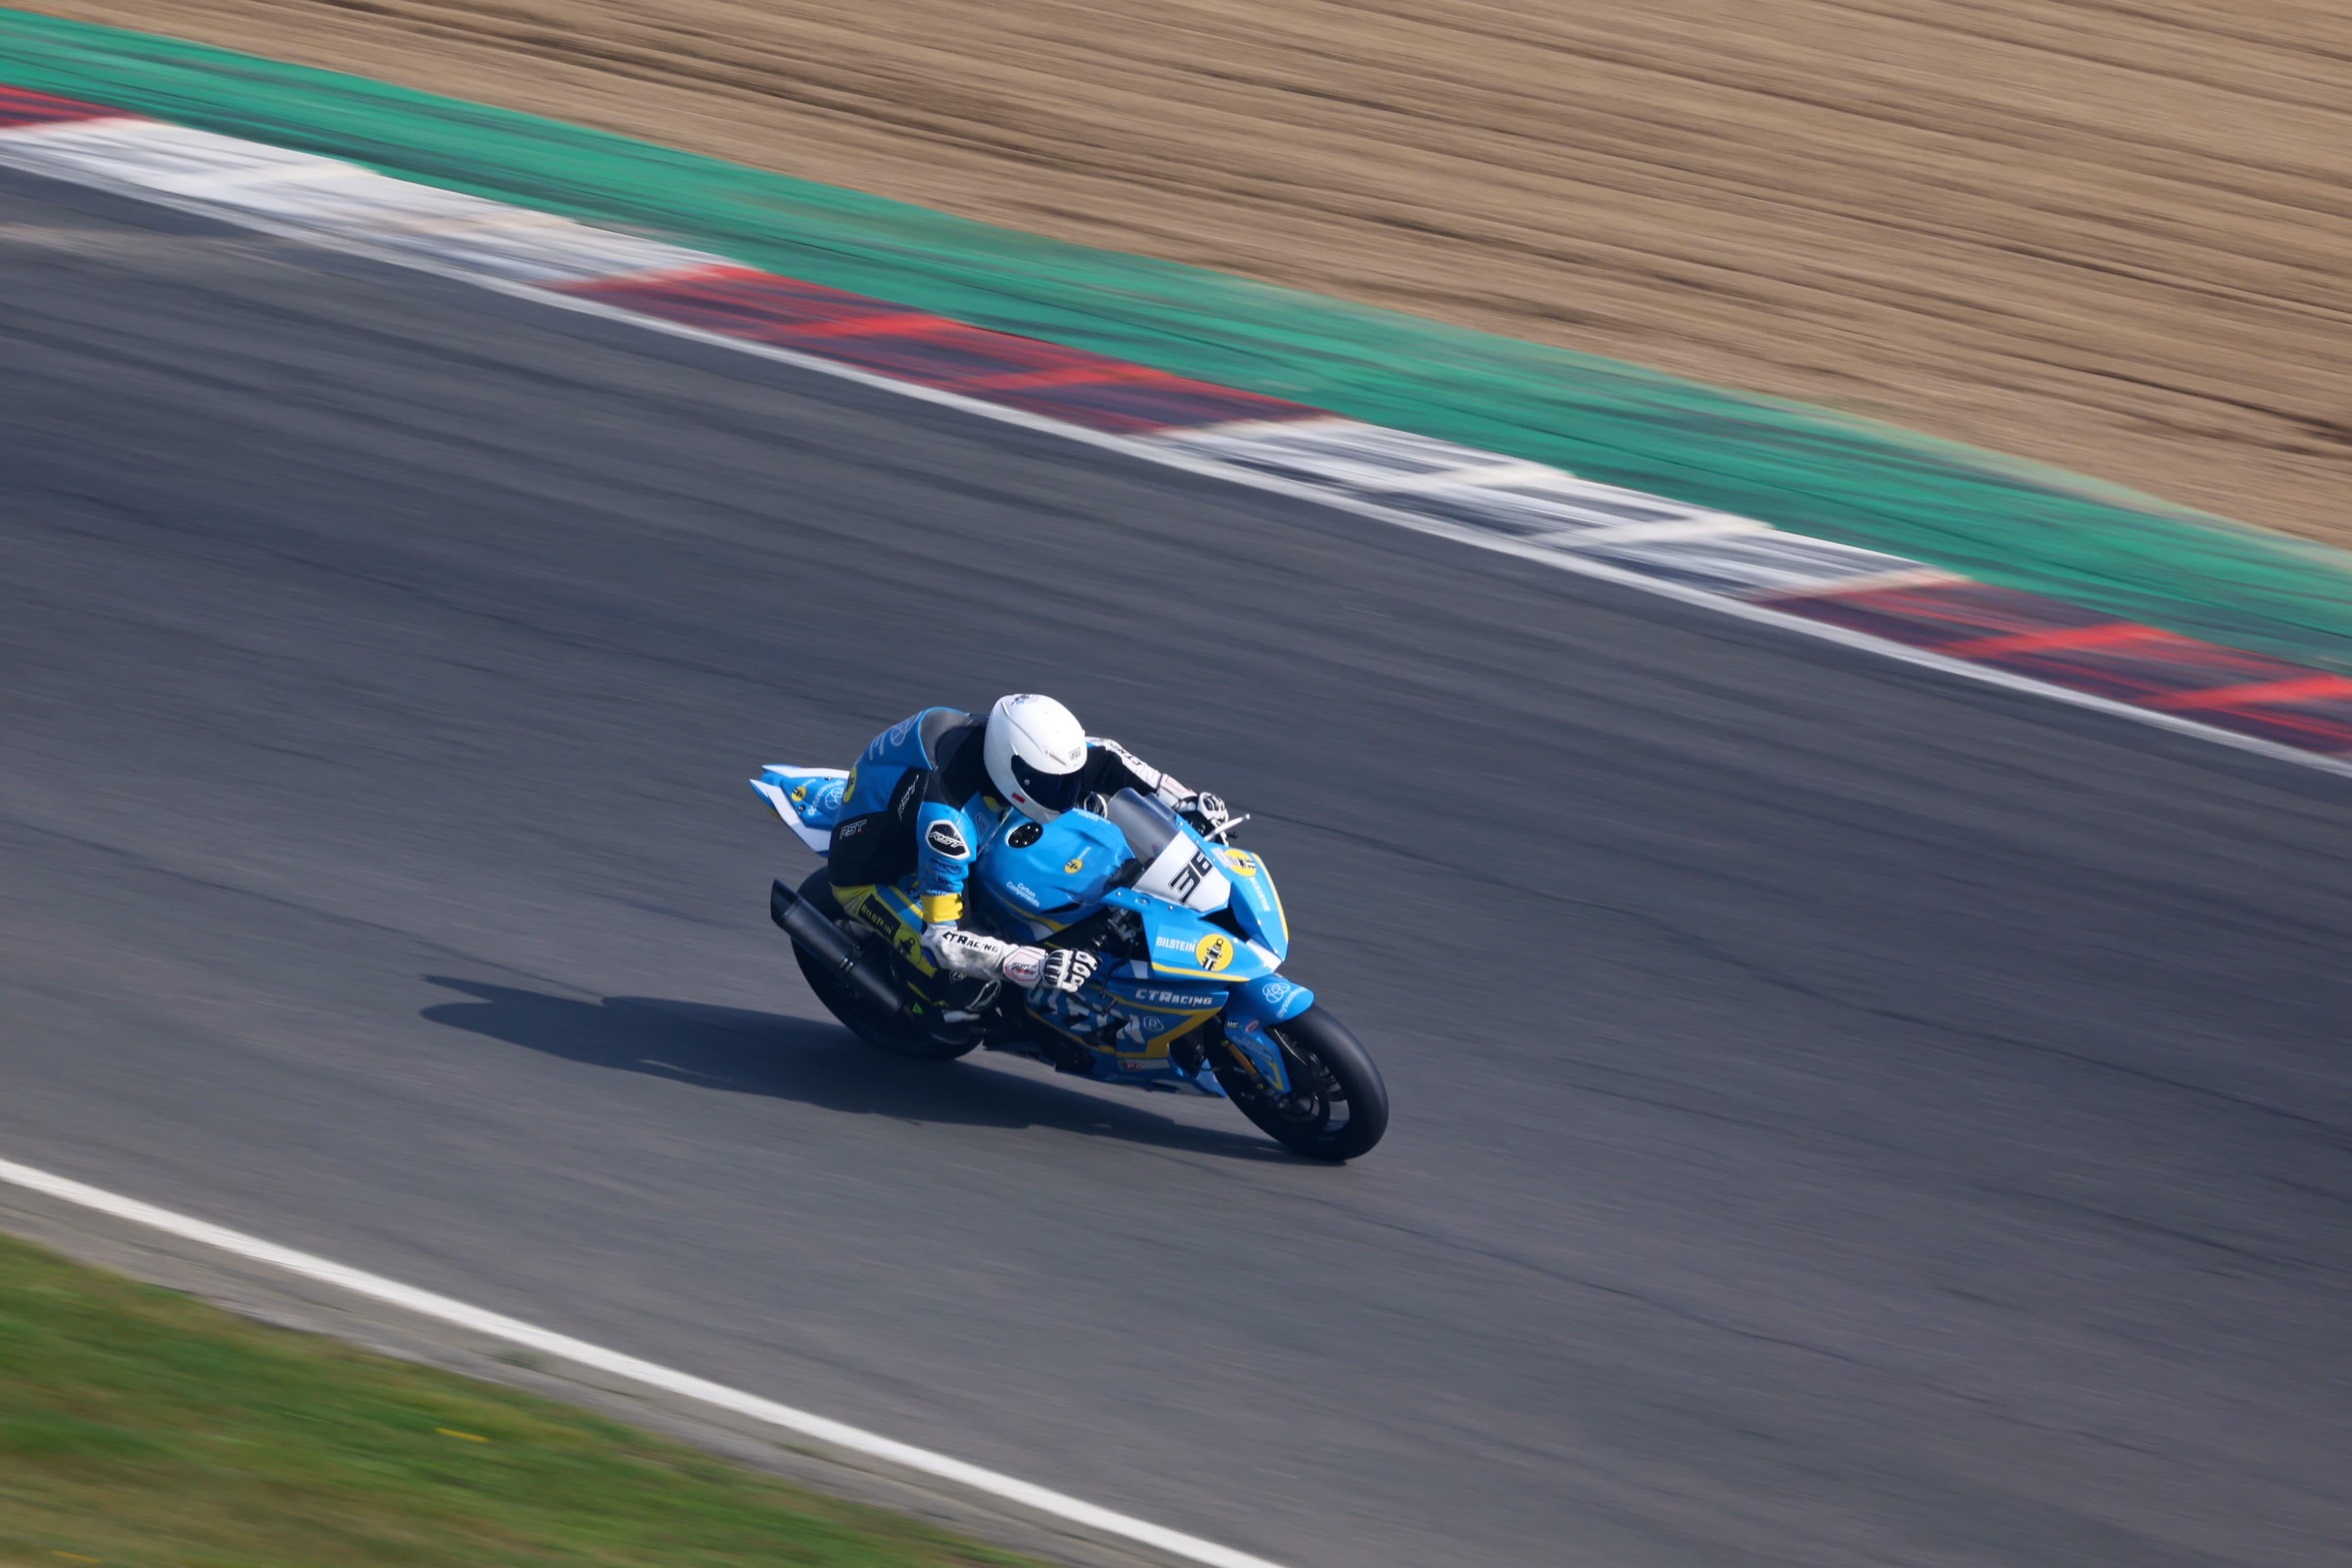 Canon EOS R3 motorcycle racing sample image with panning